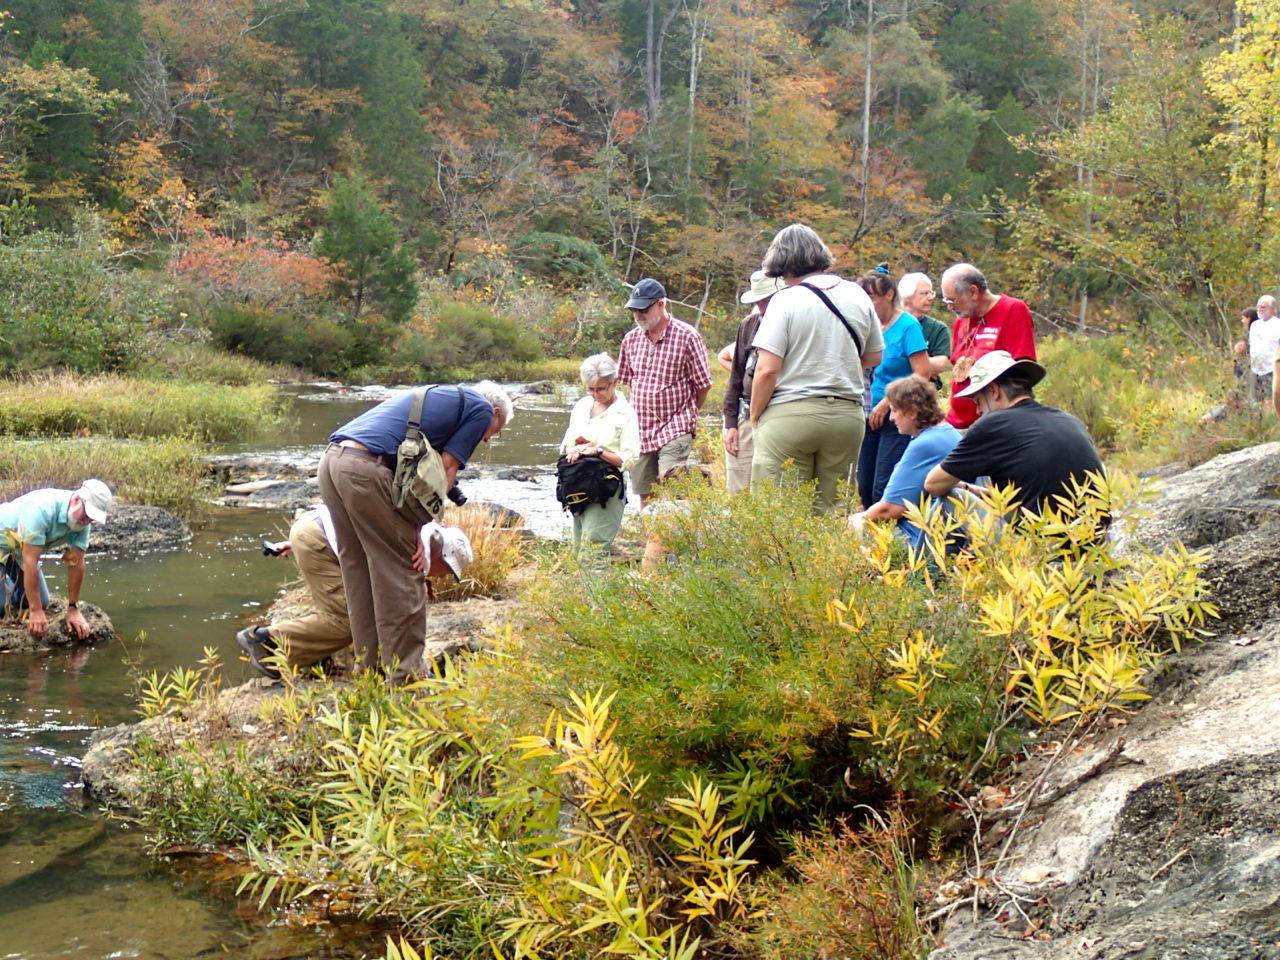 Jim Lacefield discussing the geology of the Cahaba River